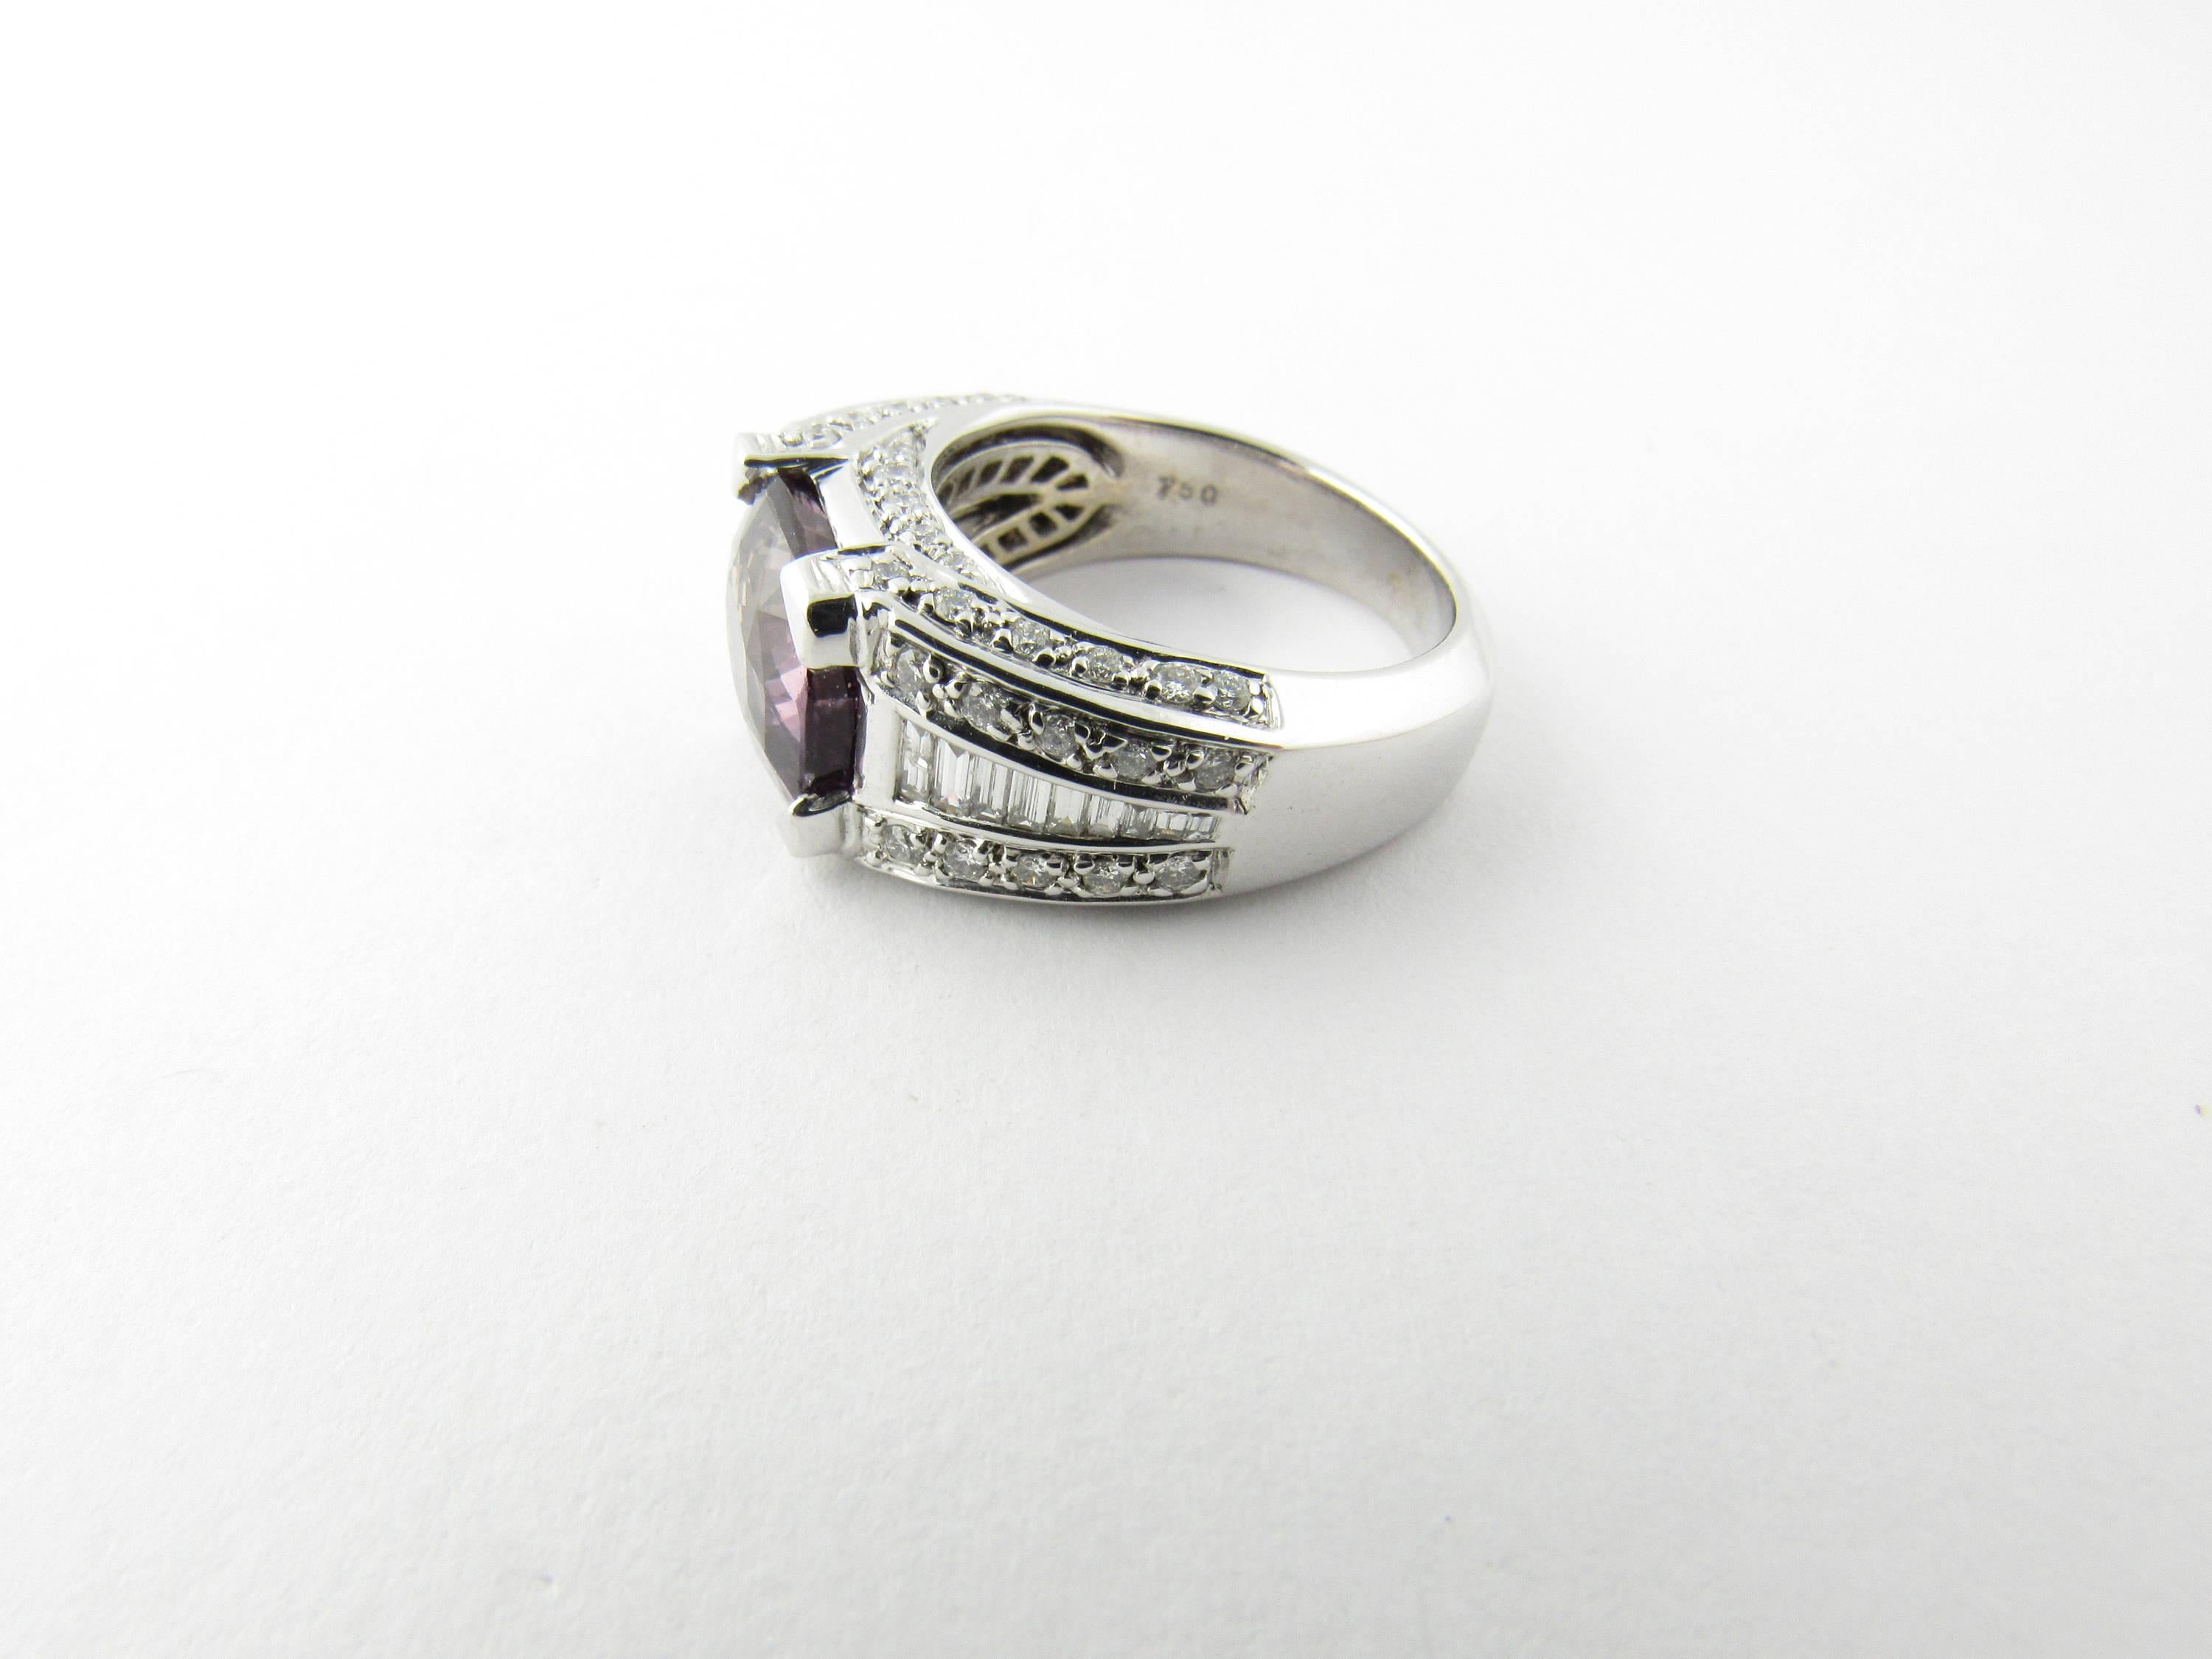 Vintage 18 Karat White Gold Amethyst and Diamond Ring Size 6.75- 
This stunning ring features a genuine amethyst in its center (10 mm x 9 mm) adorned with nine baguette diamonds on each side (.40 ct.) and surrounded by 34 round brilliant cut